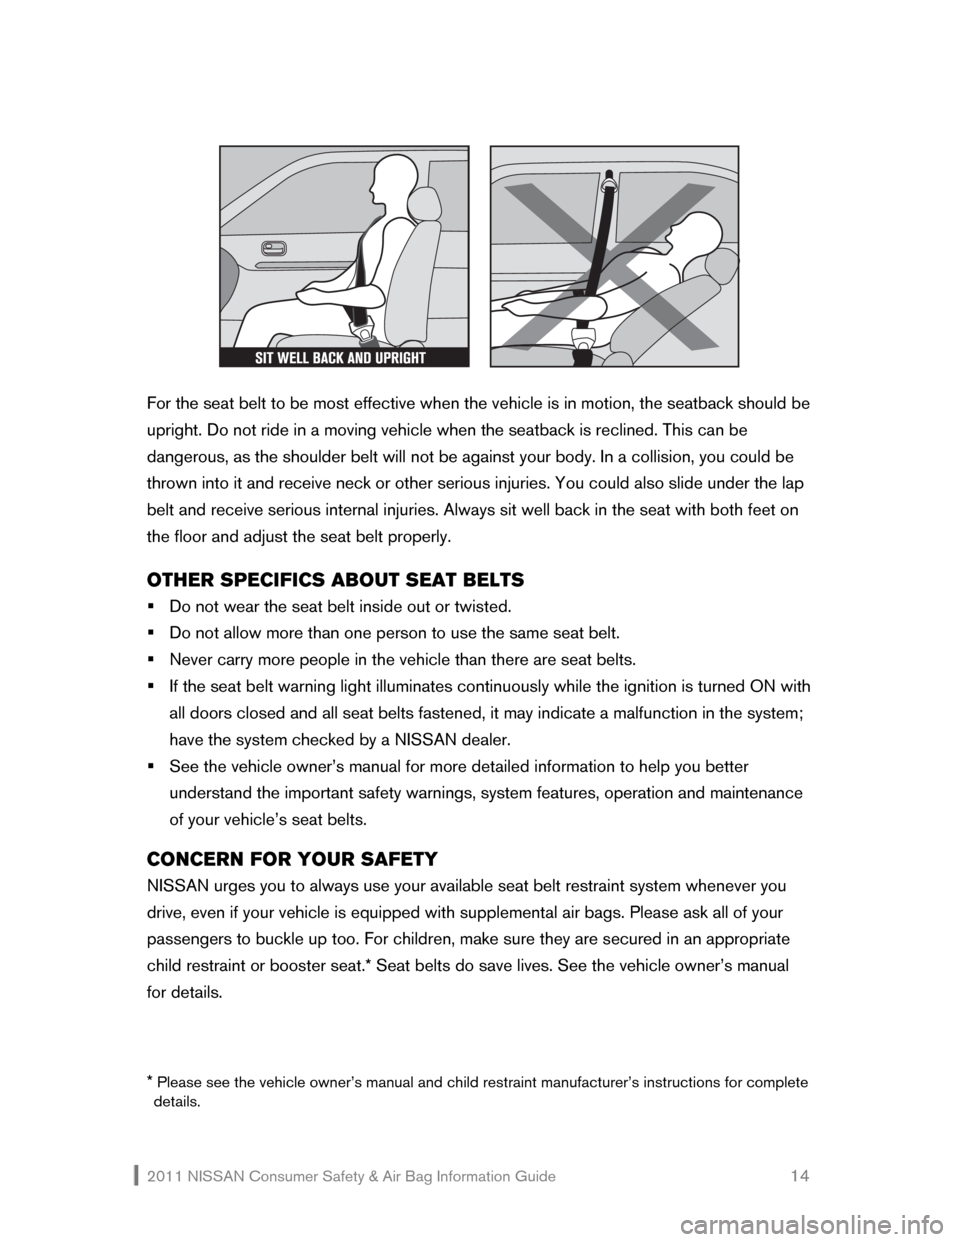 NISSAN JUKE 2011 F15 / 1.G Consumer Safety Air Bag Information Guide 2011 NISSAN Consumer Safety & Air Bag Information Guide                                                       14 
 
 
 
For the seat belt to be most effective when the vehicle is in motion, the seatba